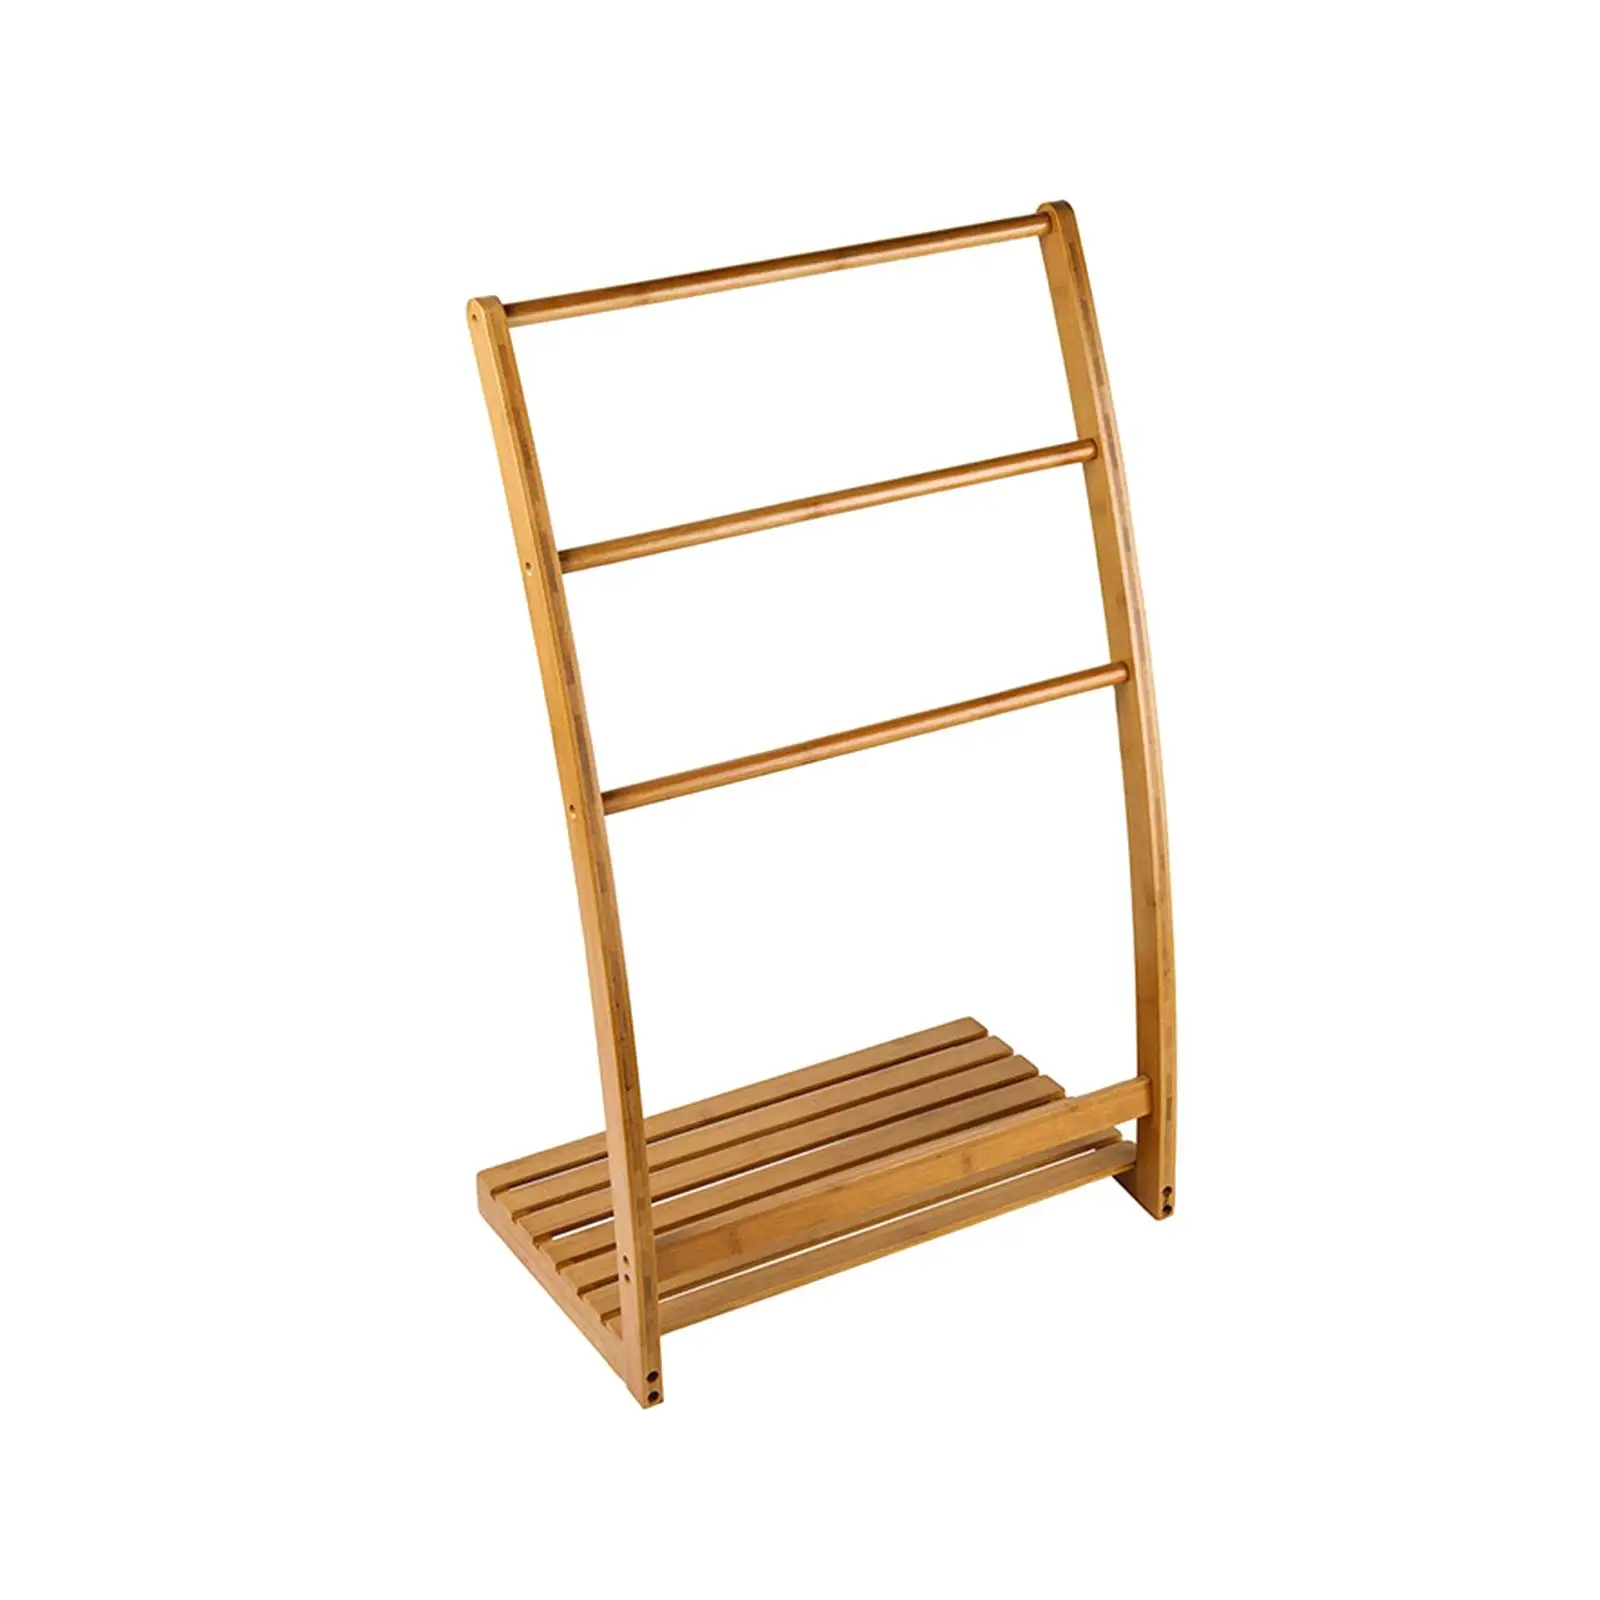 Rustic Bamboo Bathroom Towel Drying Stand Holder Bathroom Towel Stand Free Standing Blanket Rack for Hand Towel Washcloth